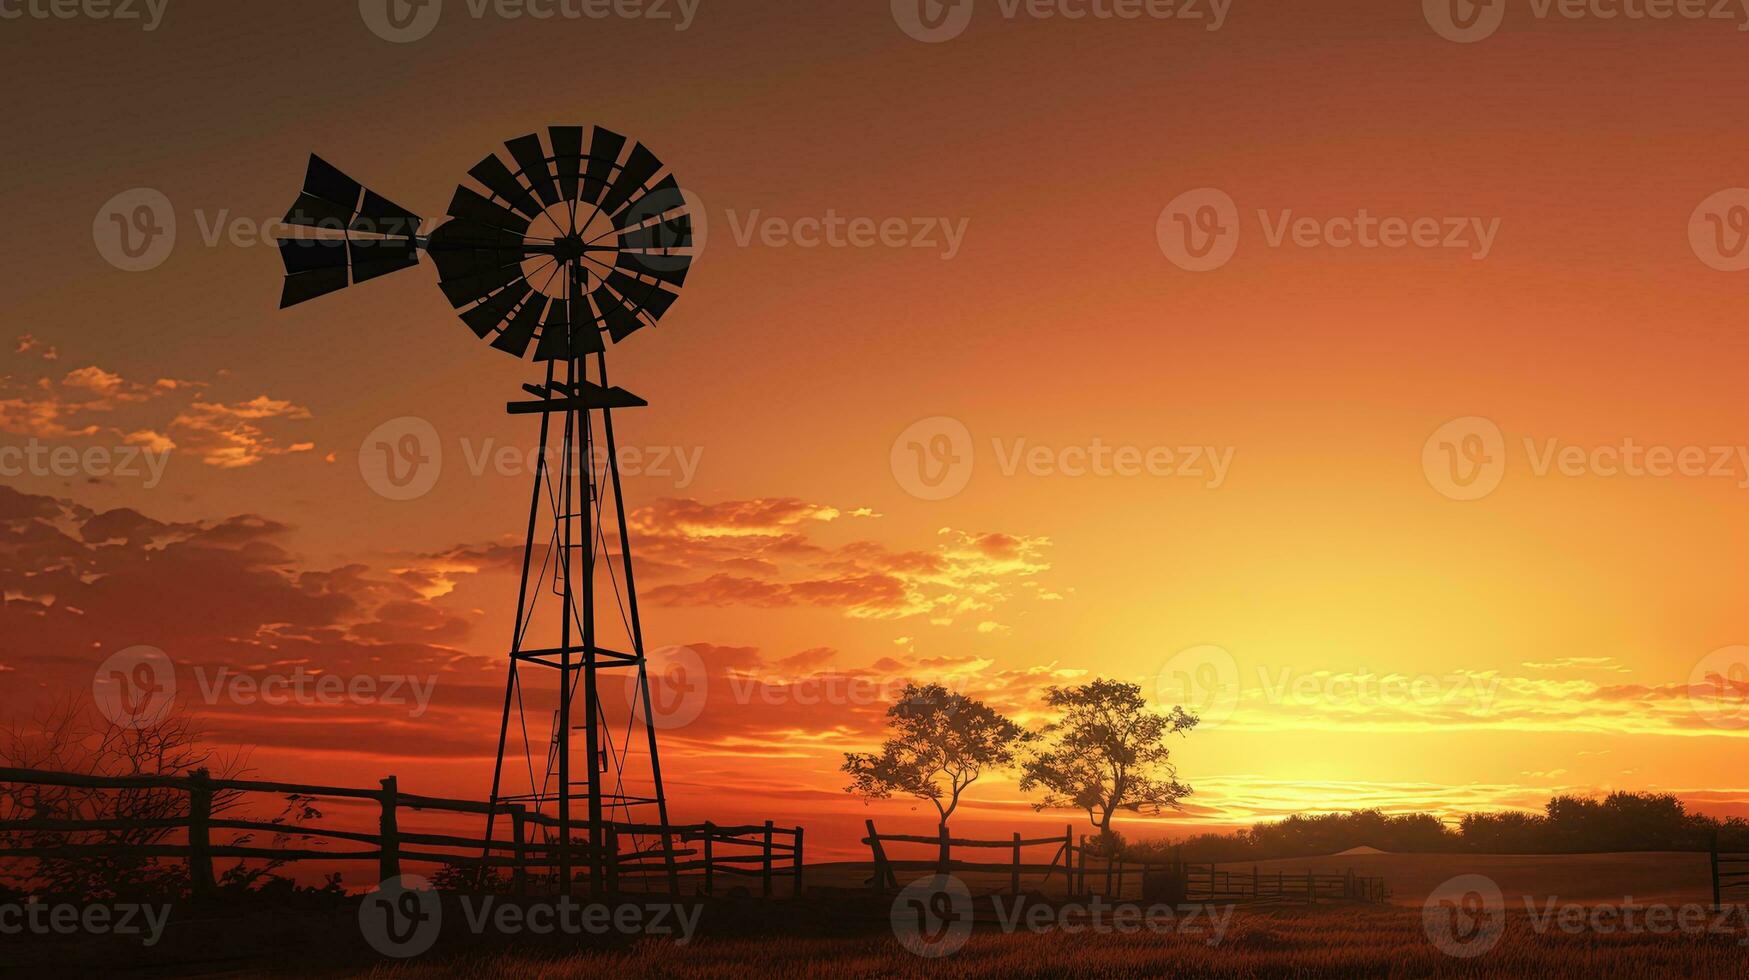 Windmill silhouette at sunset old fashioned style photo